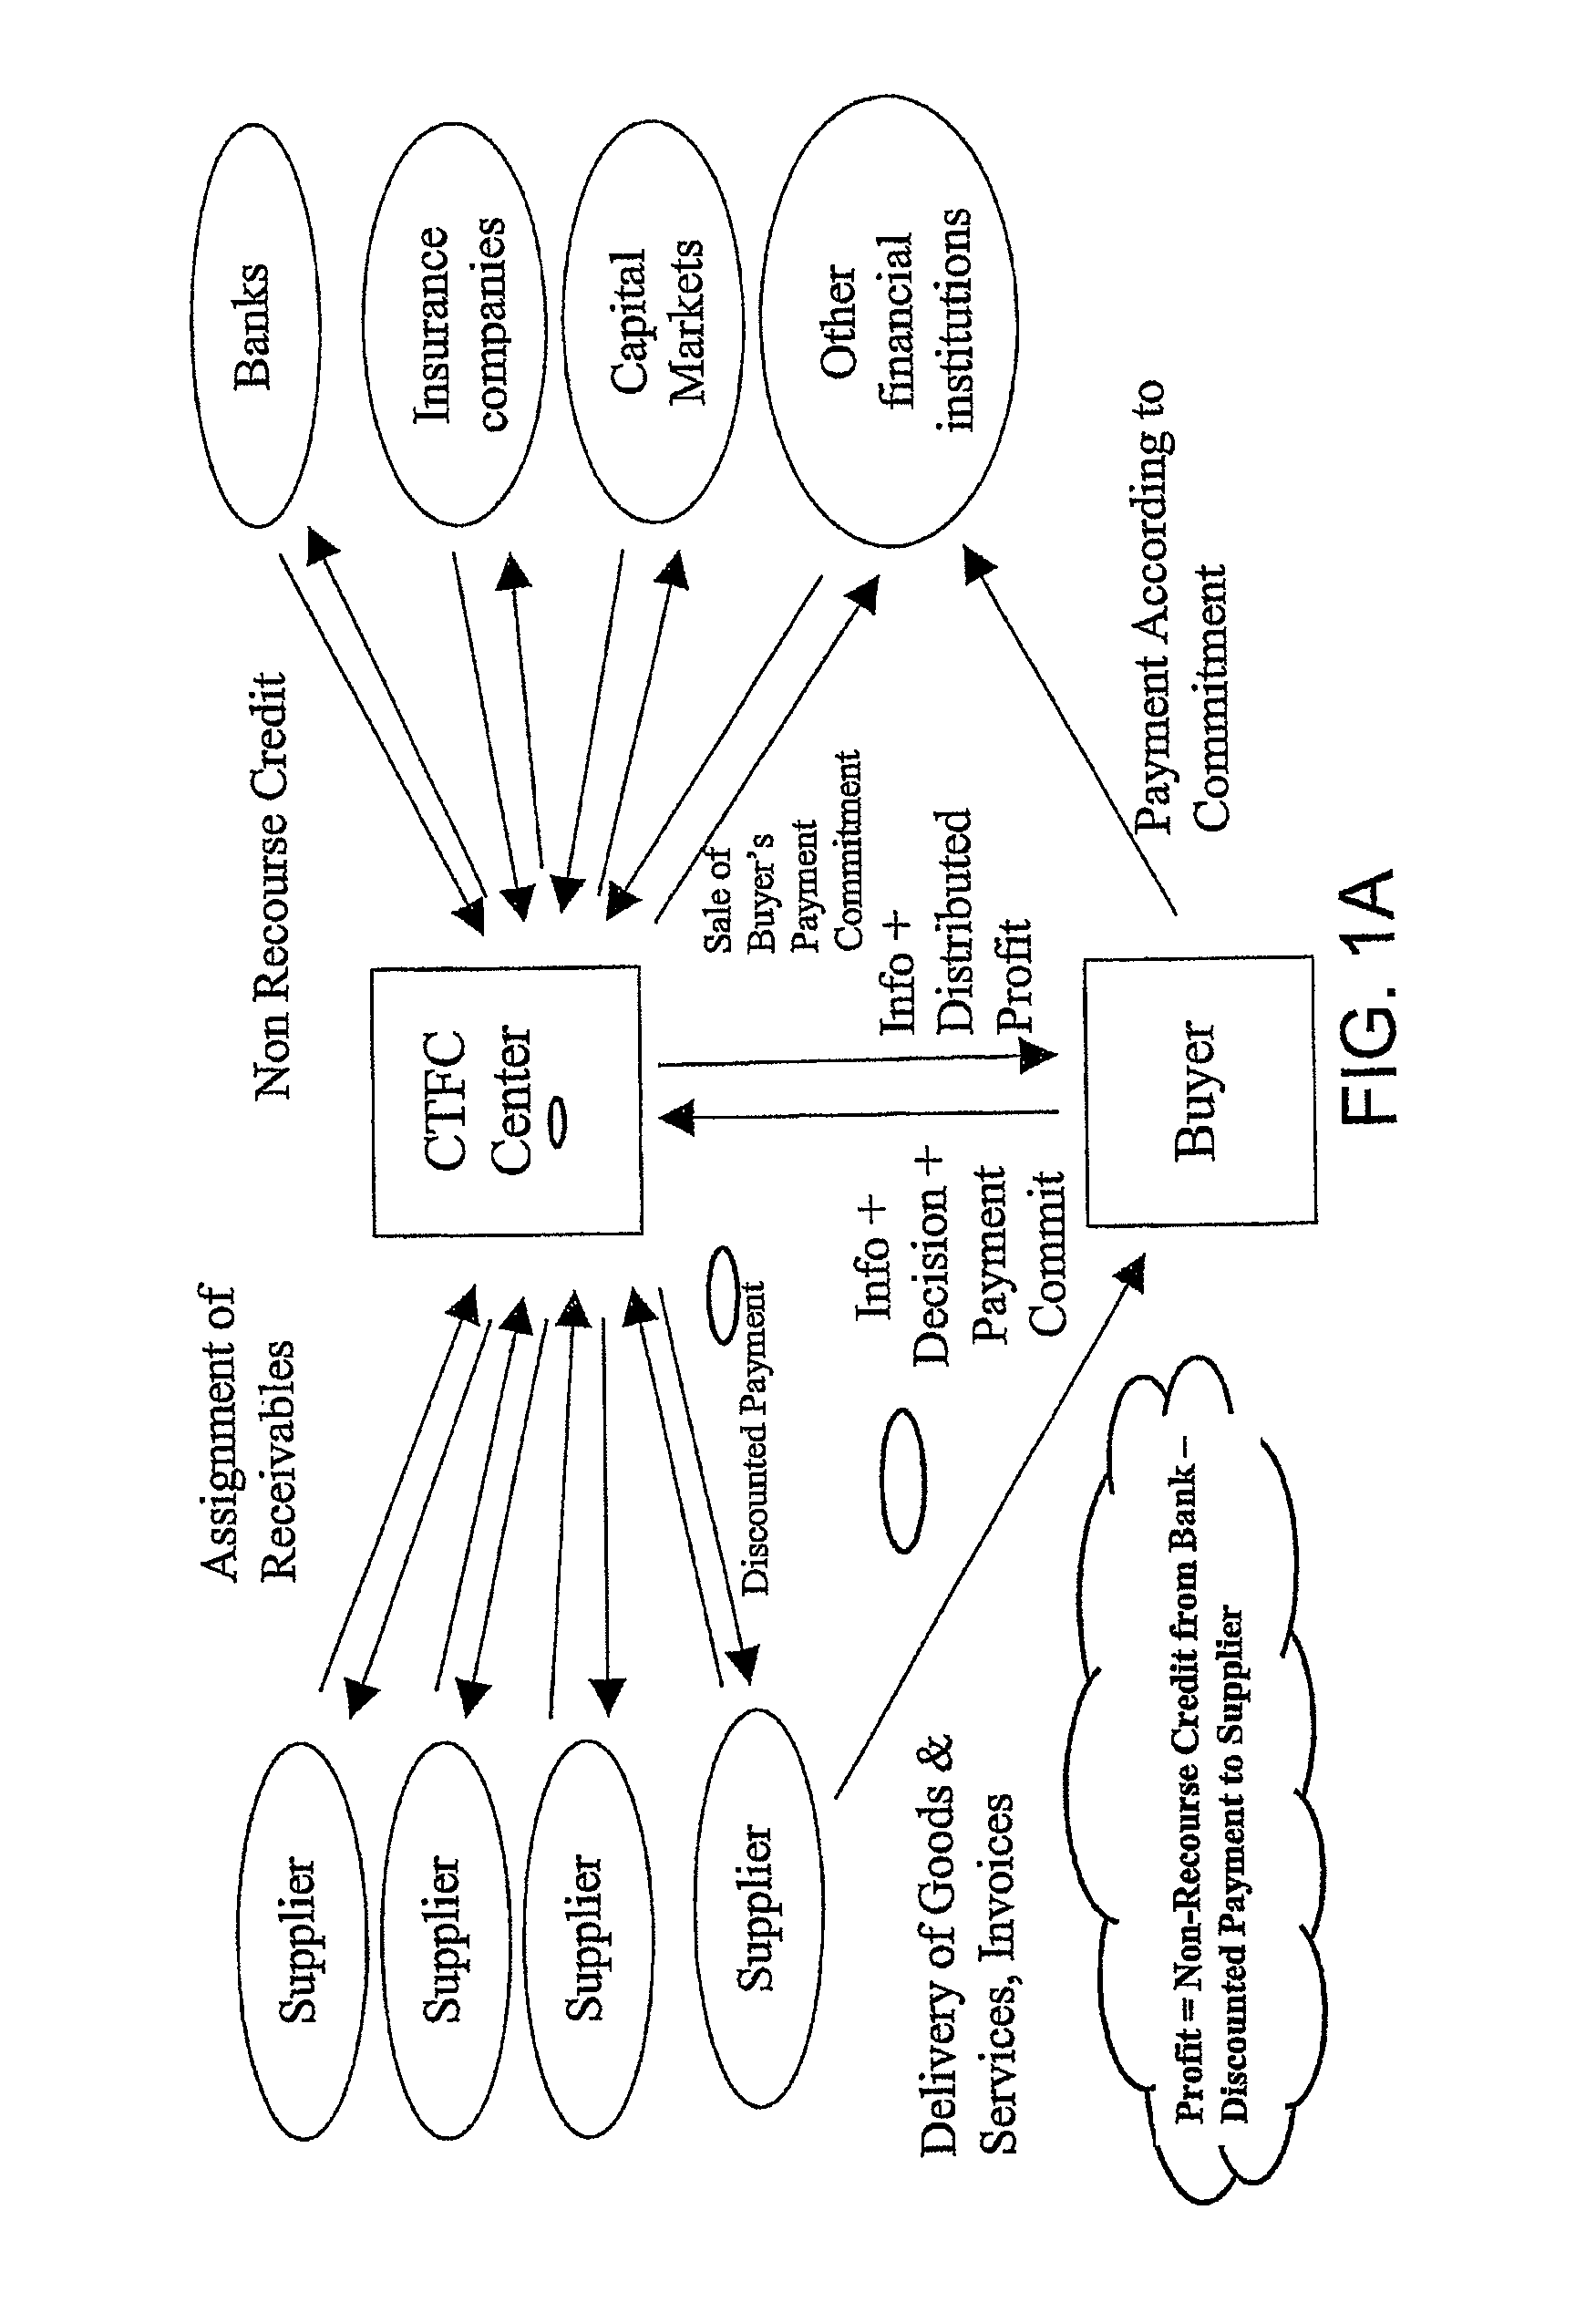 System and method for financing commercial transactions